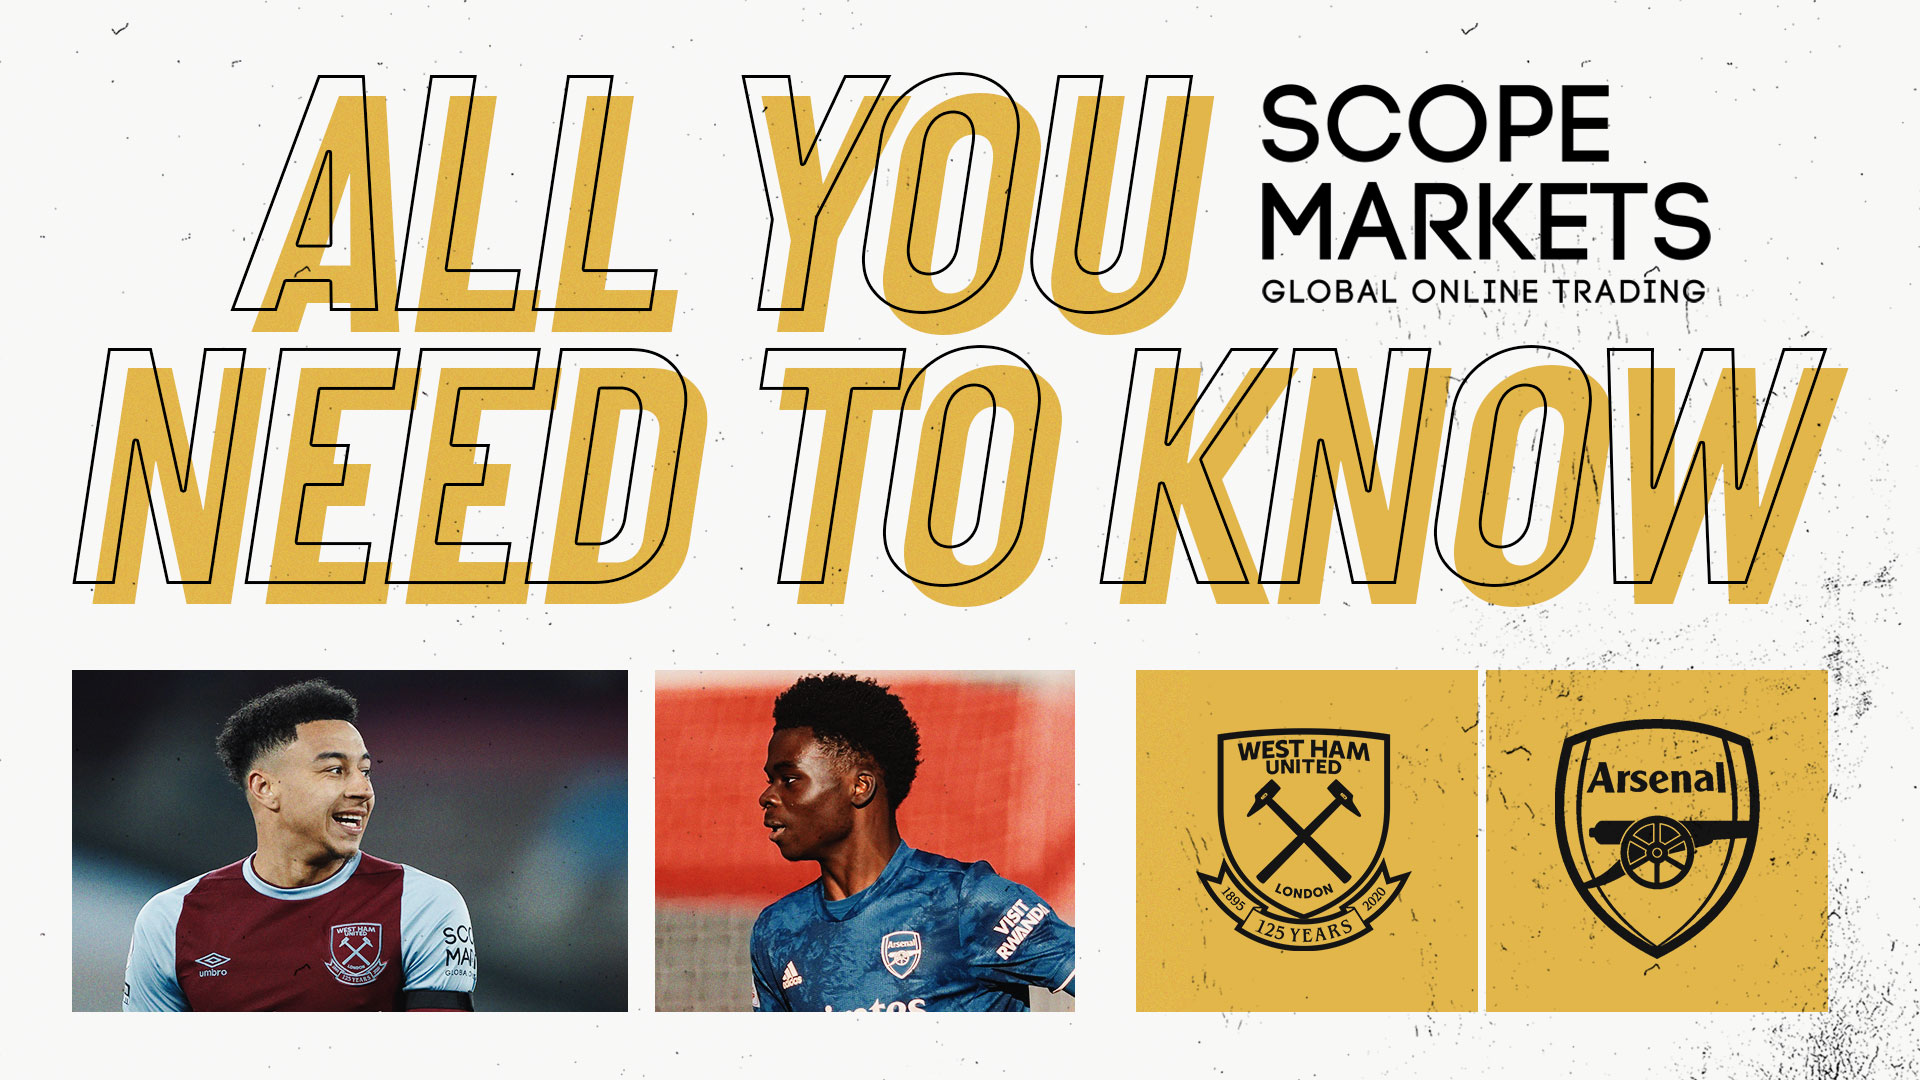 West Ham United v Arsenal - All You Need To Know